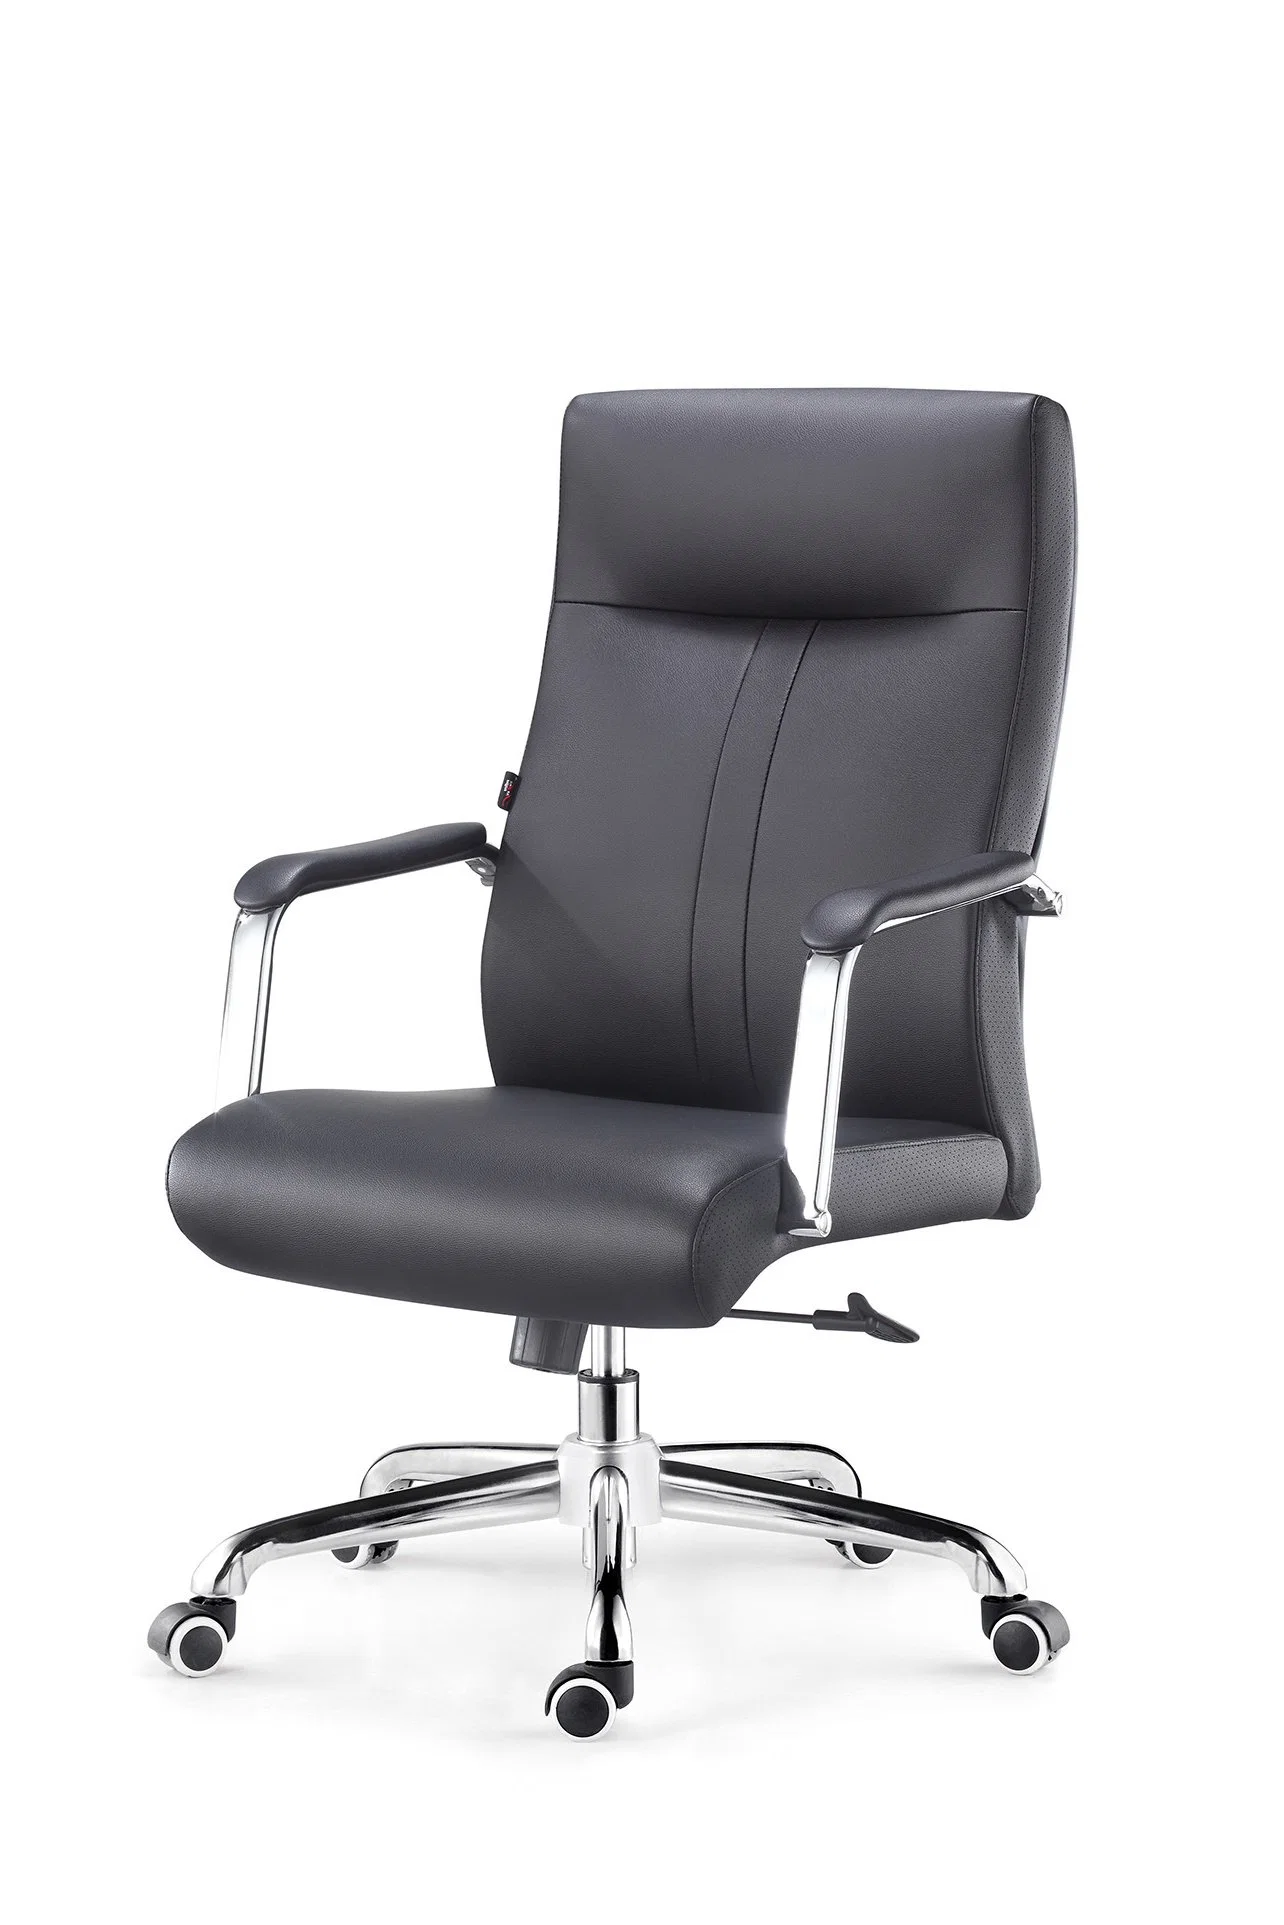 Wholesale Black Leather Office Furniture Executive Chair with Metal Base